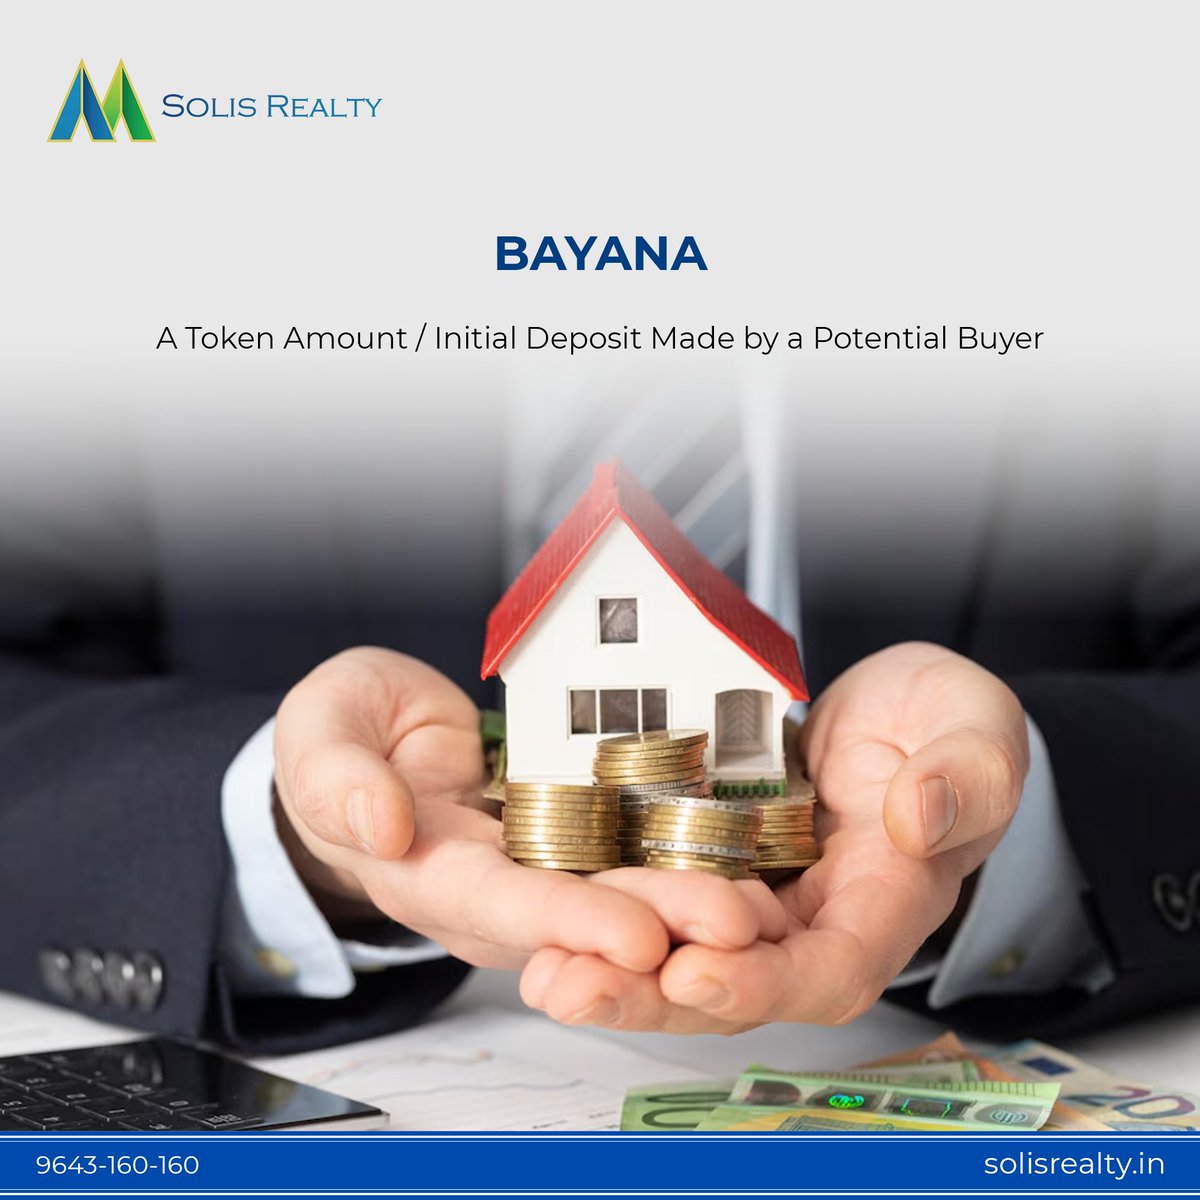 By giving #Bayana, the potential #buyer expresses #serious interest in purchasing a #property.

#SolisRealty #realestate #realestateagent #realestateexpert #realestateassociatebroker #realestateinvestor #realestateinvesting #realestatelife #realestateforsale #realtor